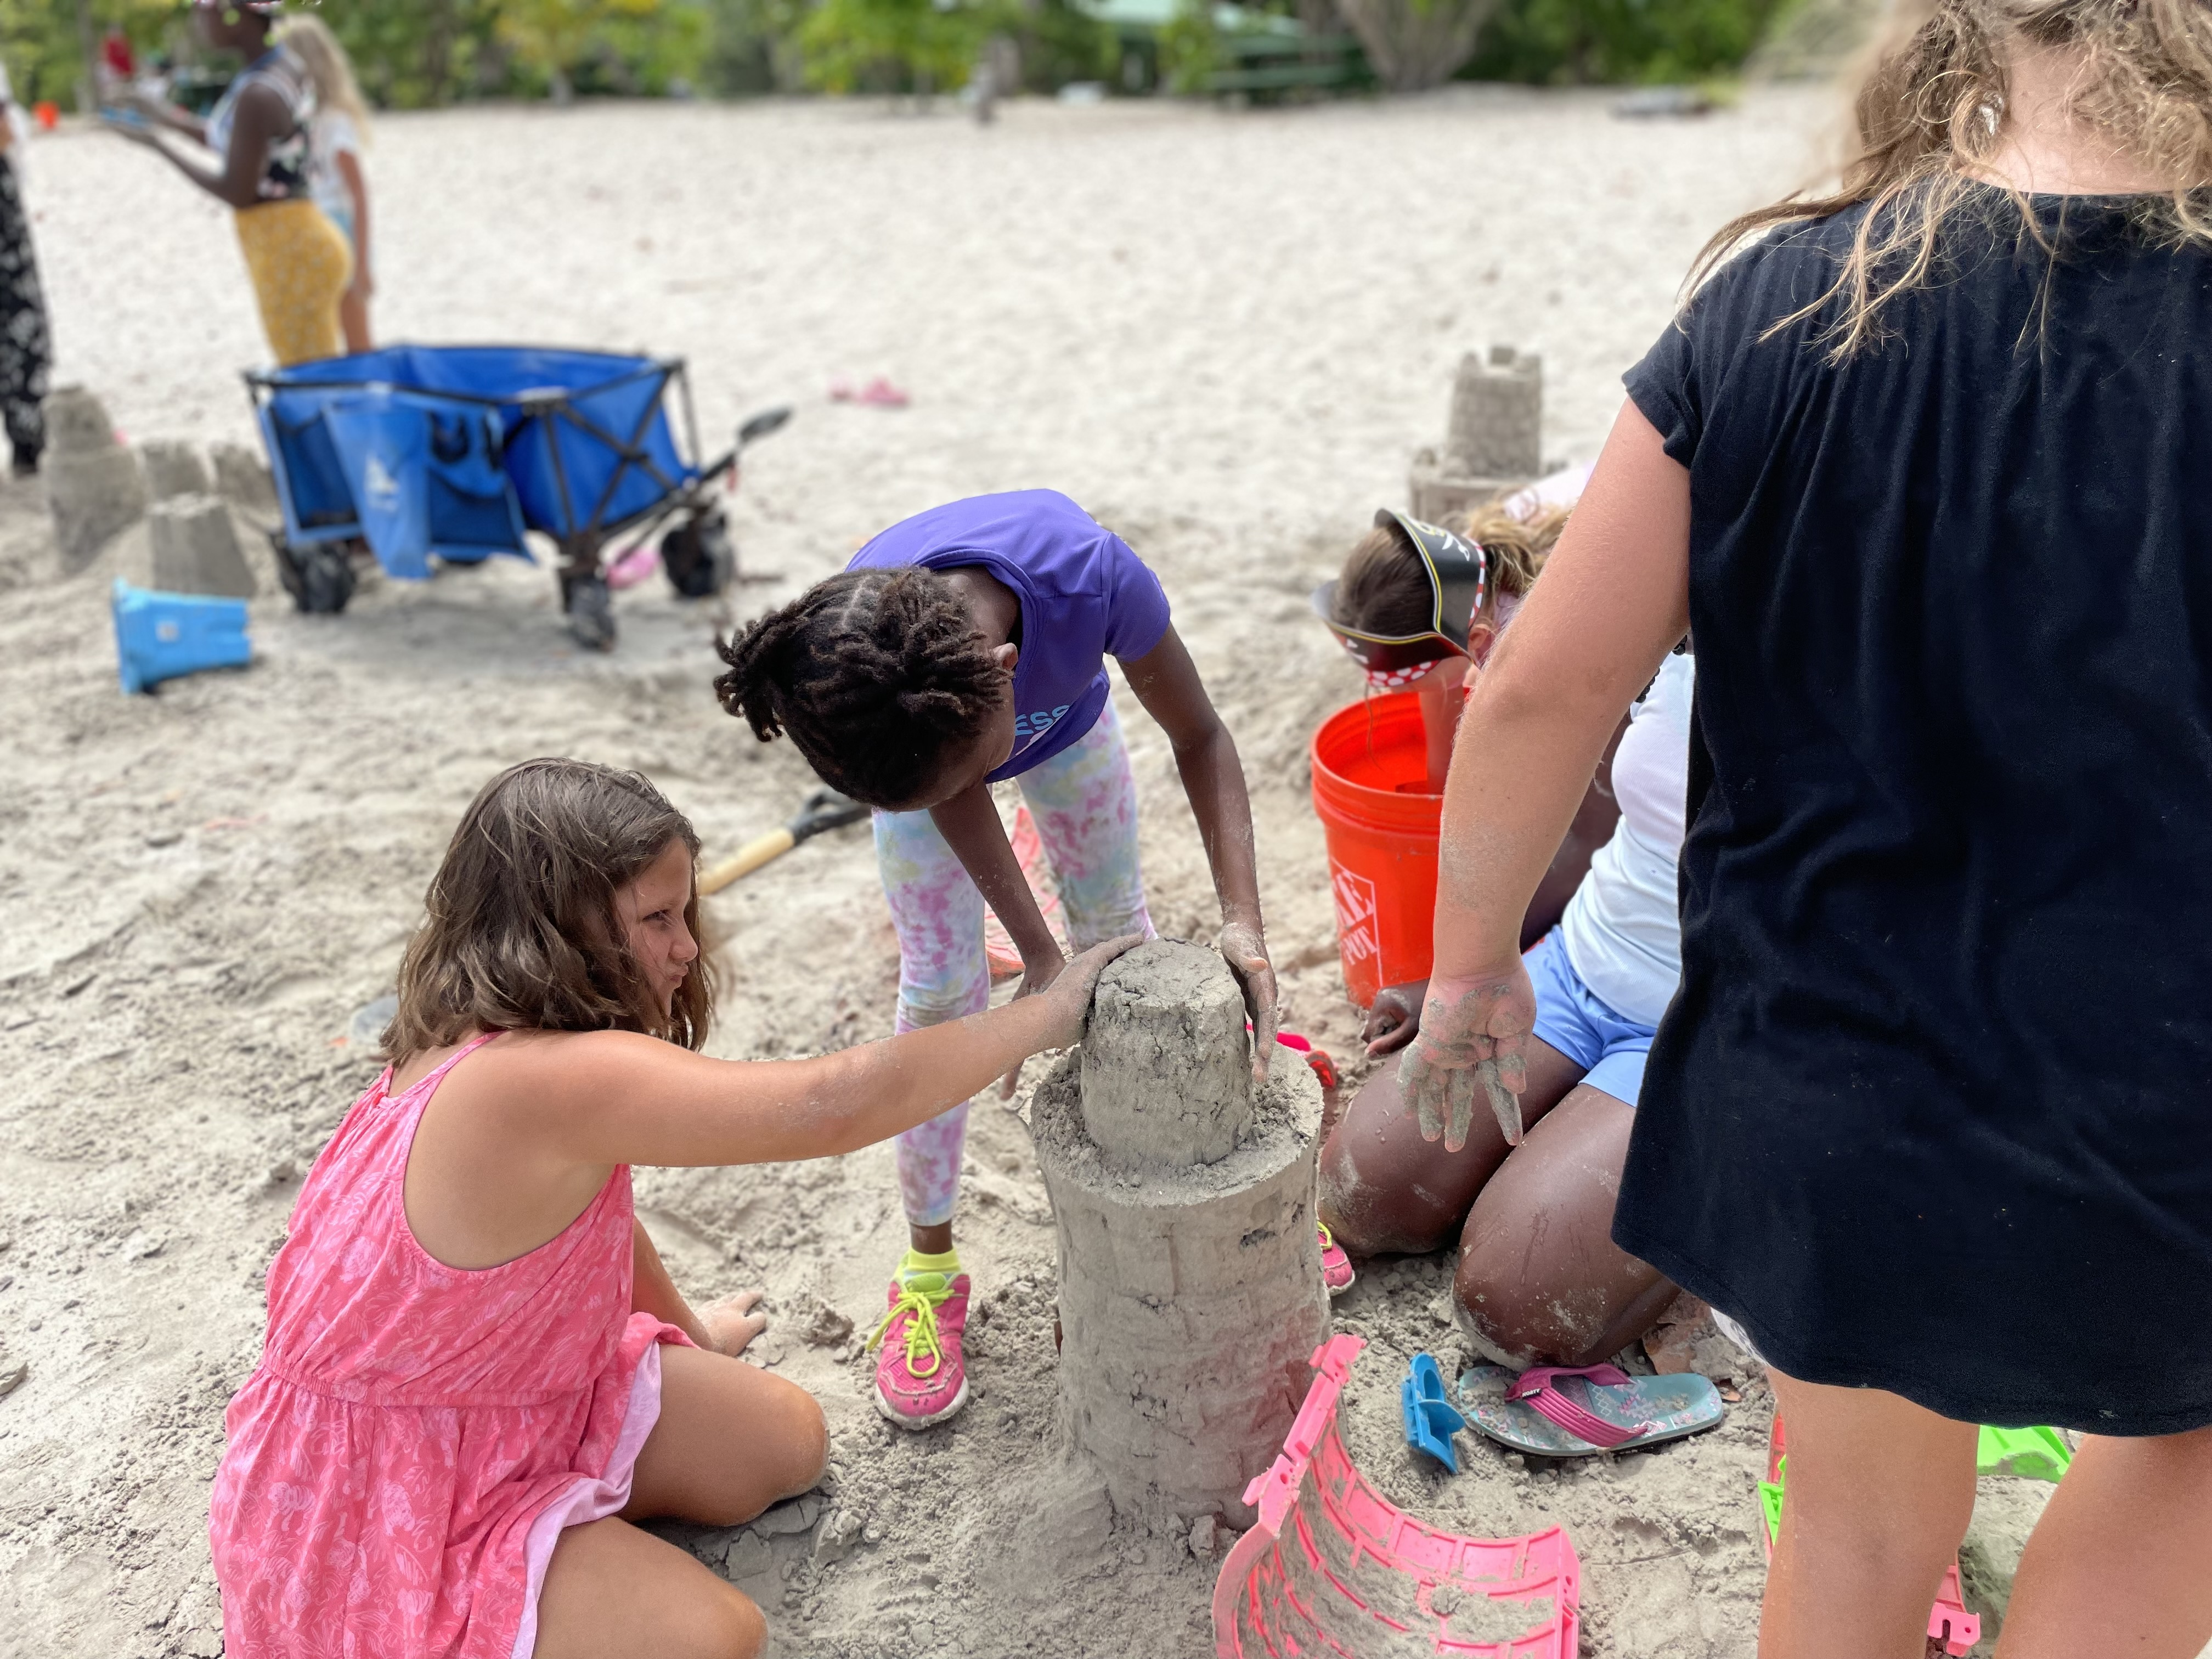 Two girls work together to pat down the final tower of a sandcastle.